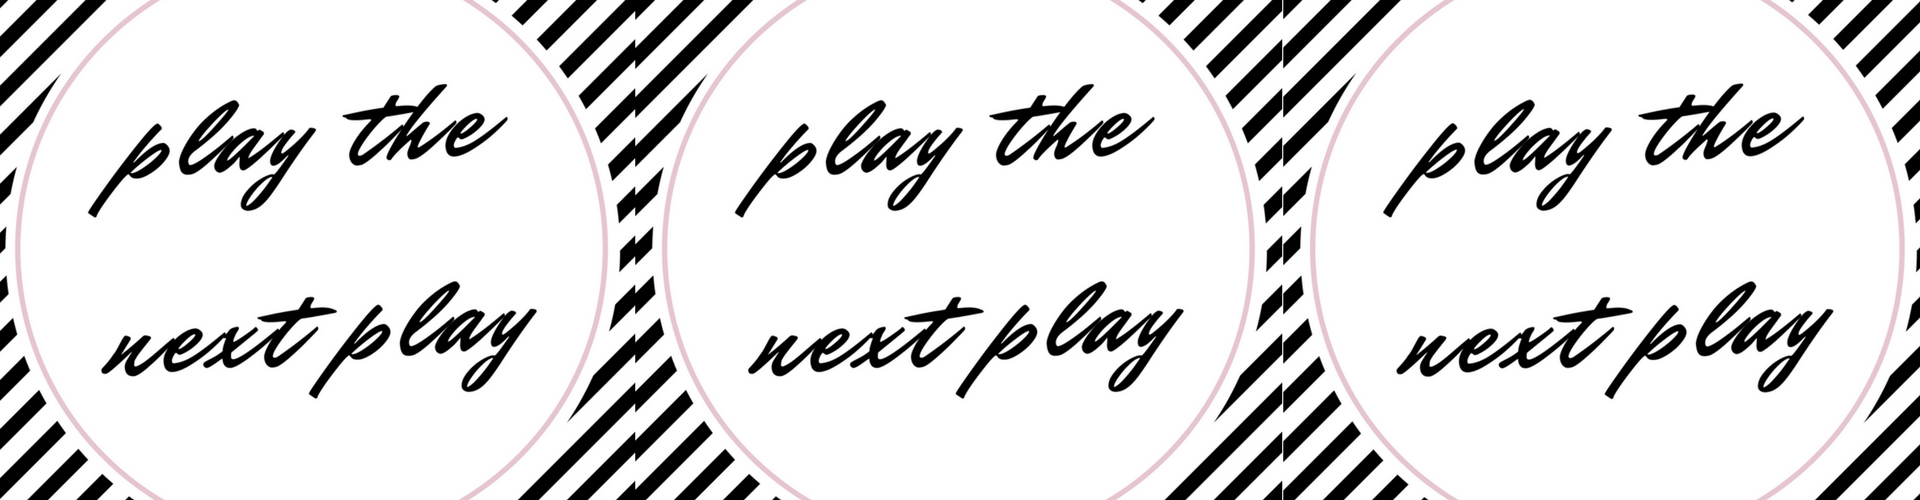 Play the next play.